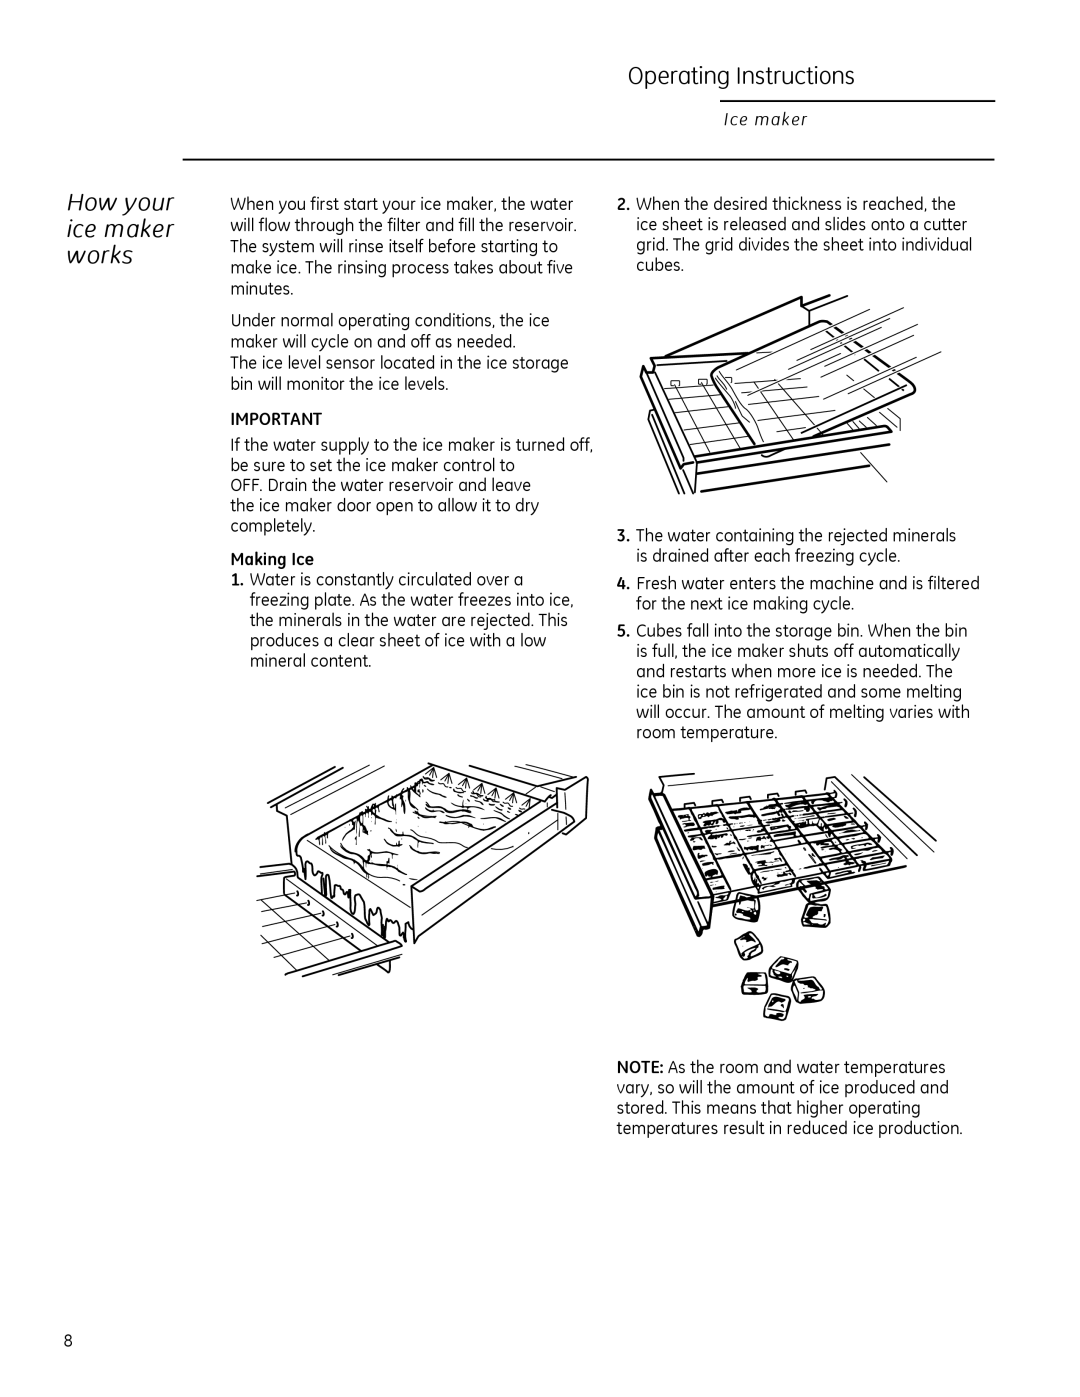 GE ZDIS150, ZDIC150 owner manual Operating Instructions, How your ice maker works, Making Ice 